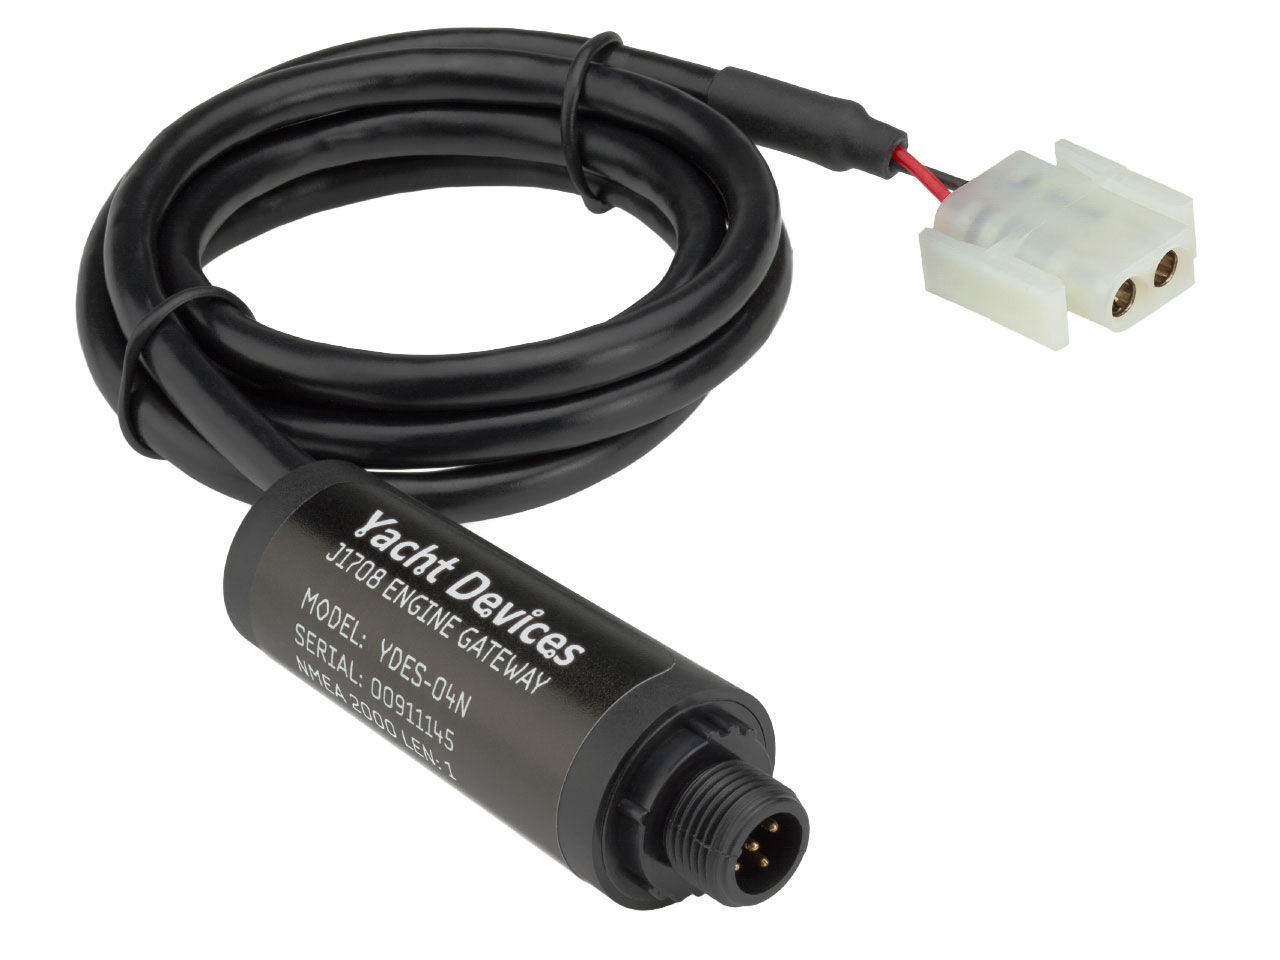 Yacht Devices J1708 Motor Interface YDES-04N micro-C NMEA2000